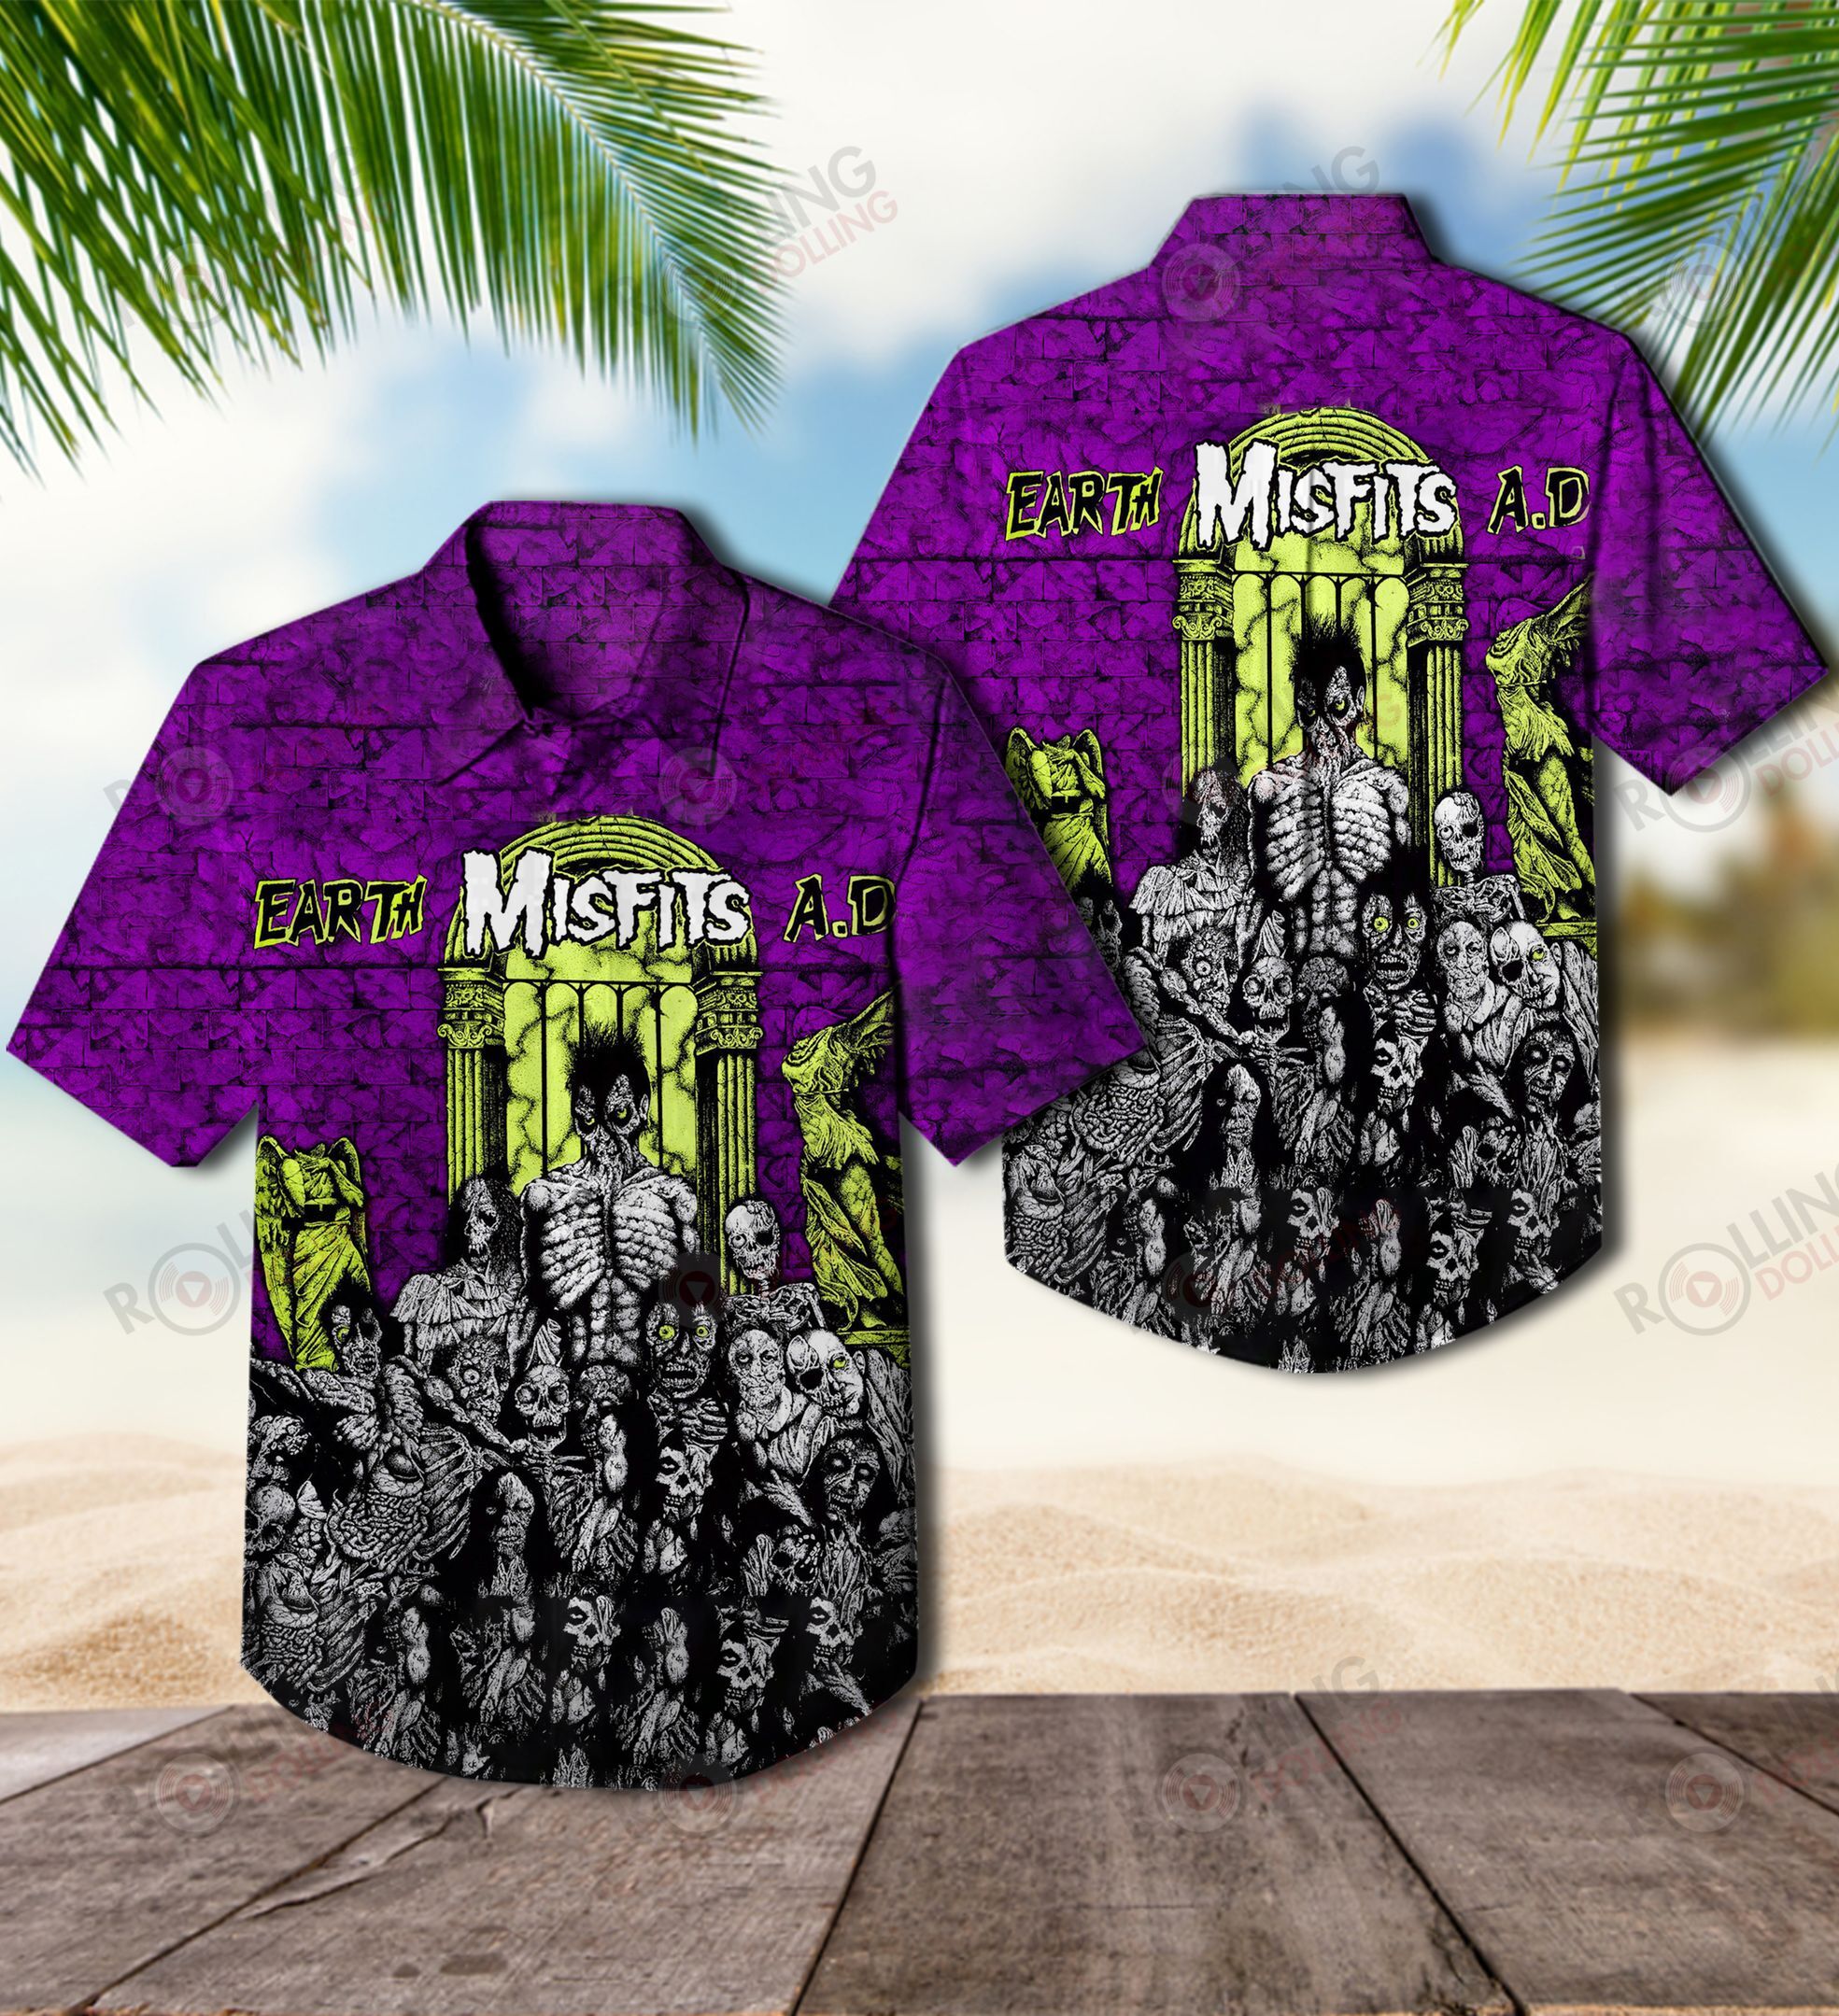 Now you can show off your love of all things band with this Hawaiian Shirt 69